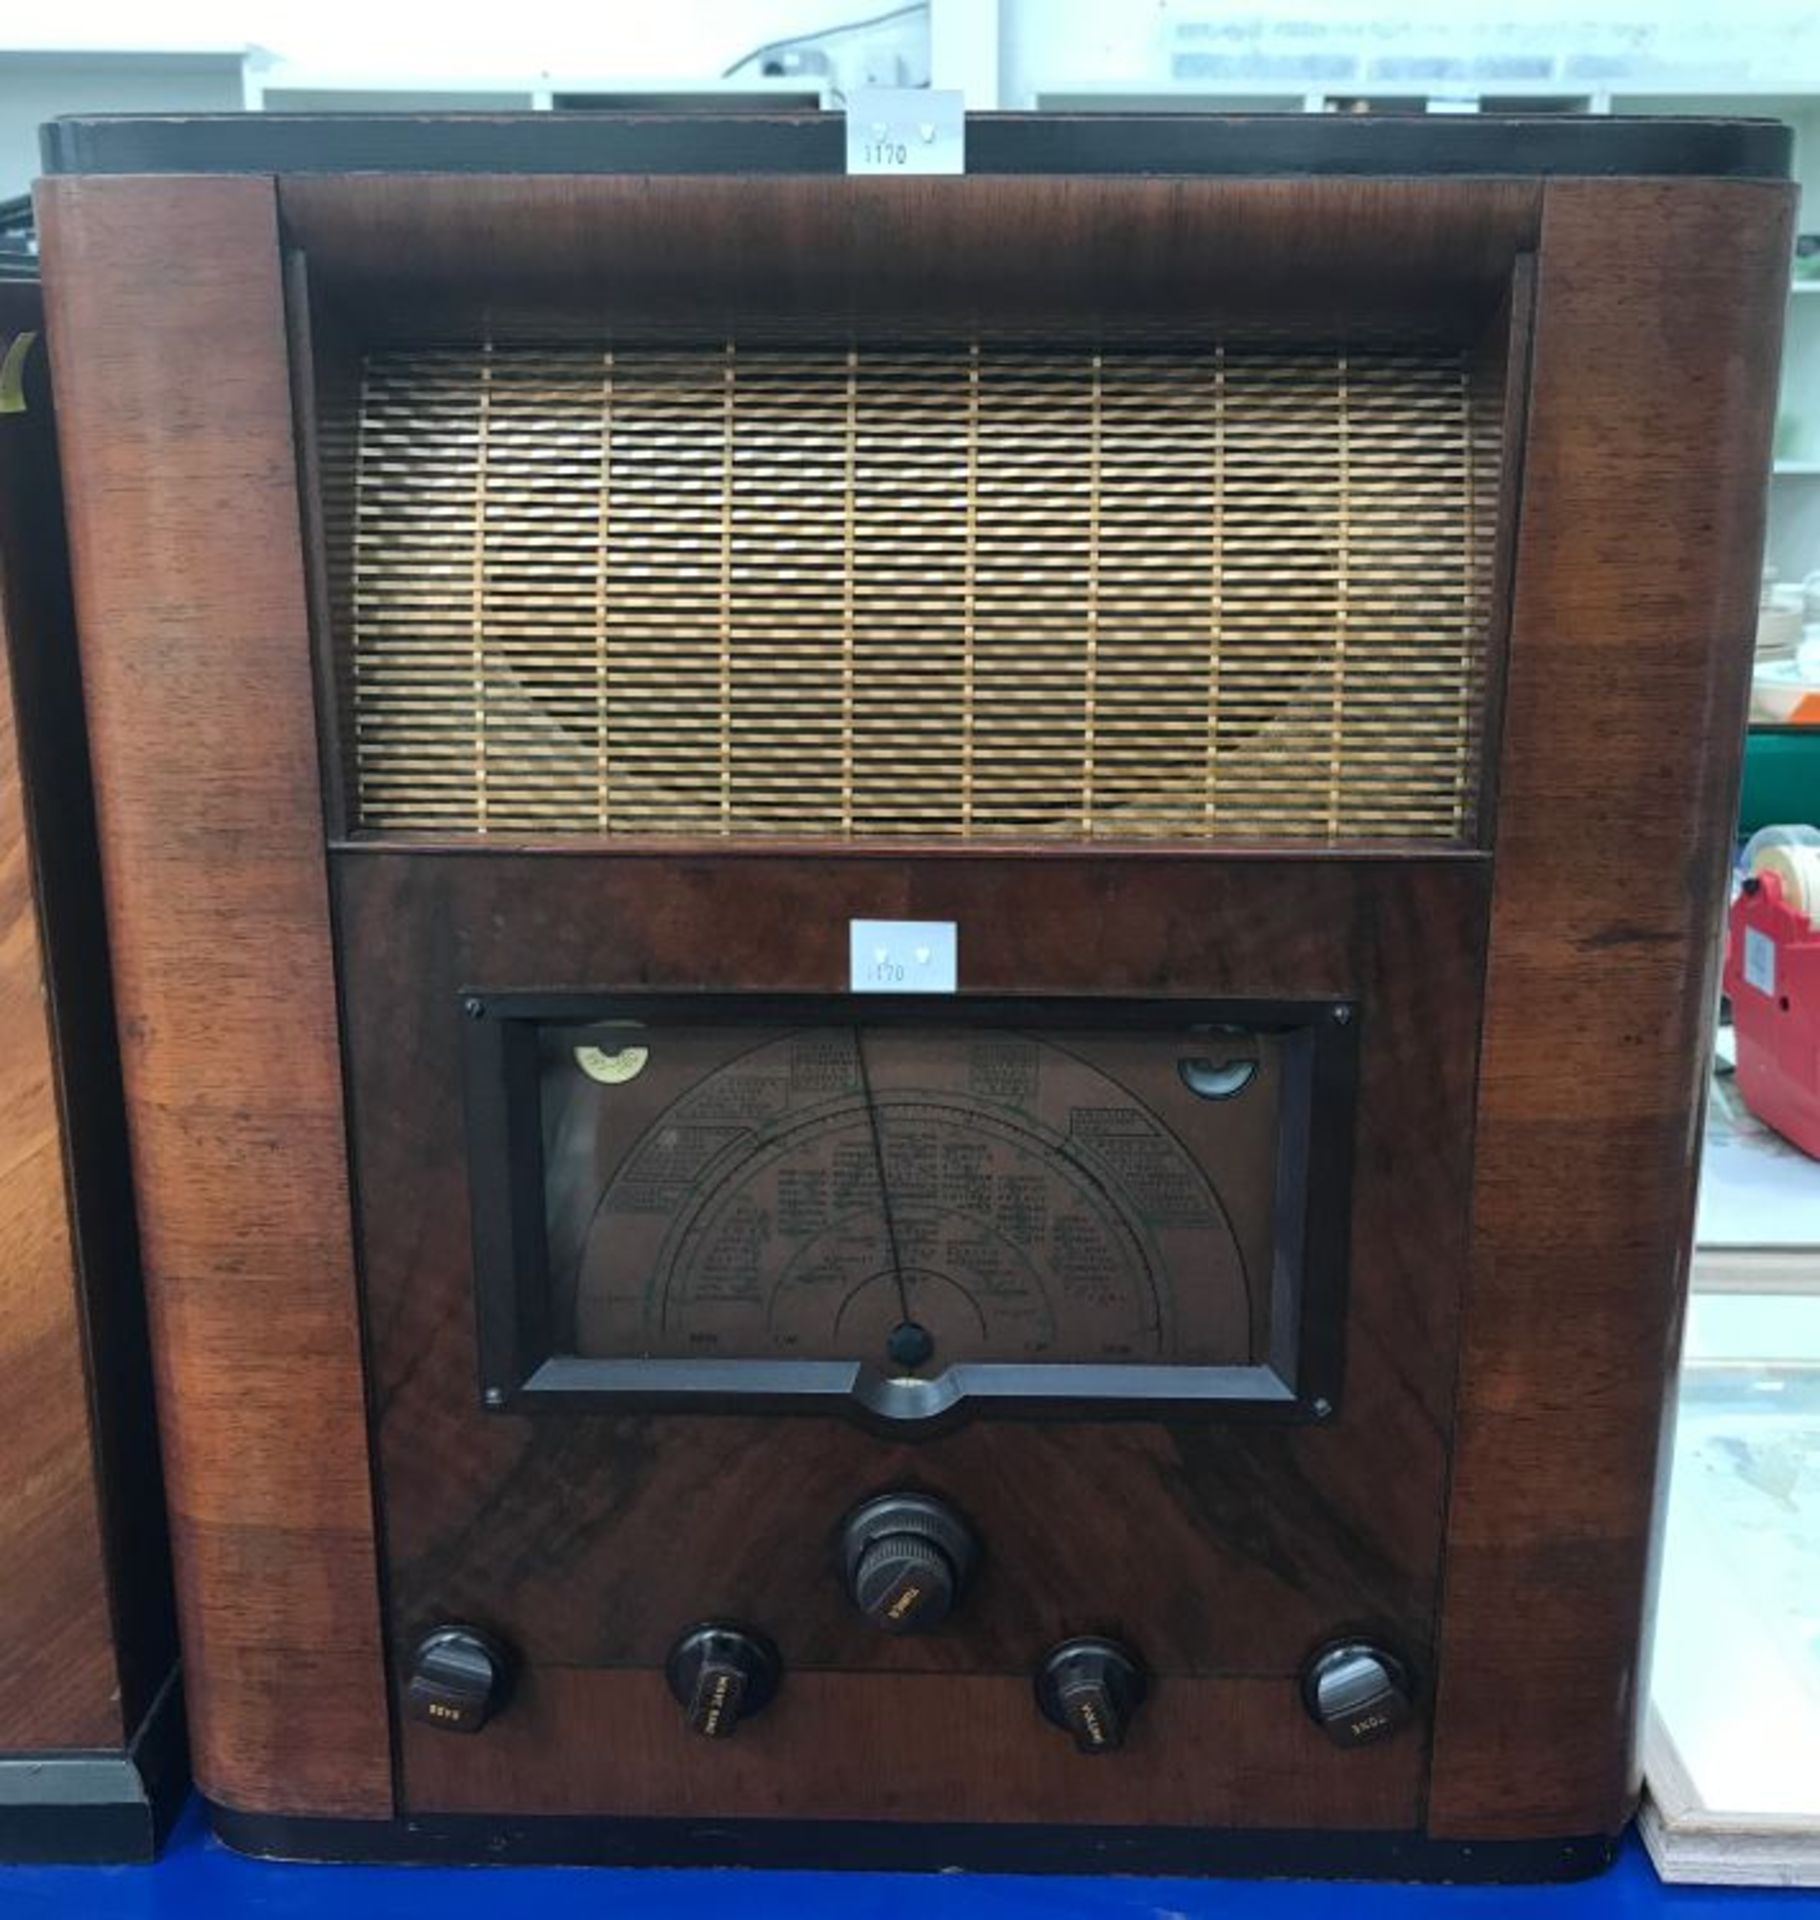 1937 Radio - HMV Model No 469. Good quality performance. NB All radios in restored condition but